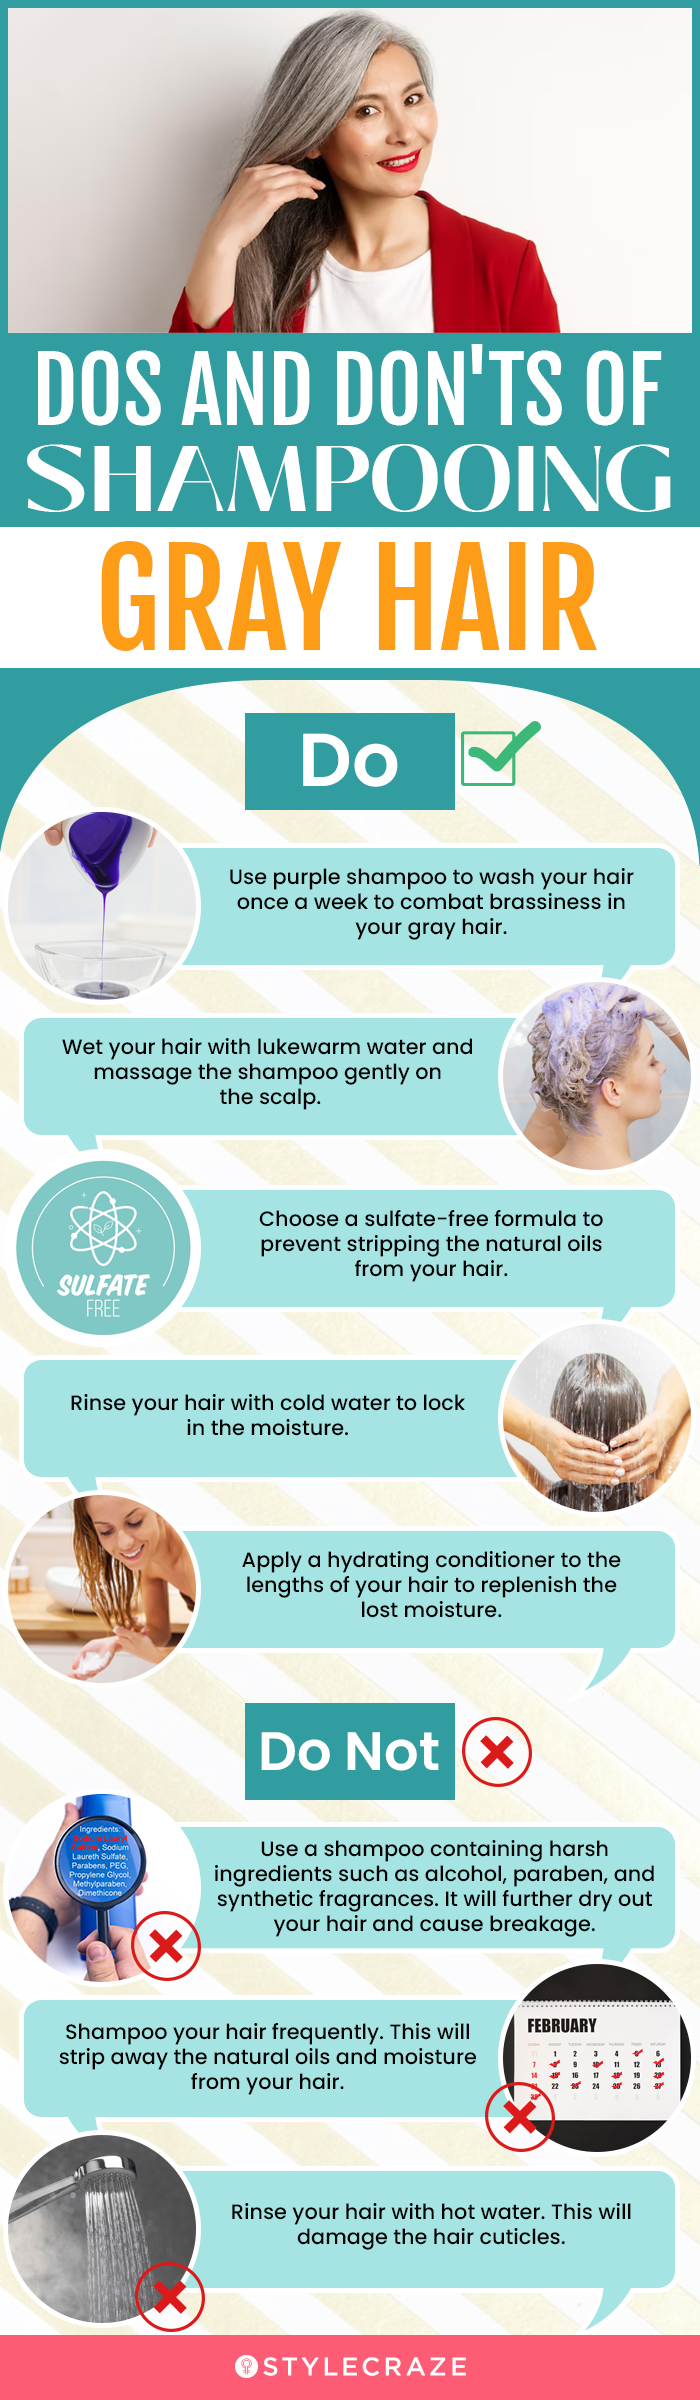 Dos And Don'ts Of Shampooing Gray Hair (infographic)